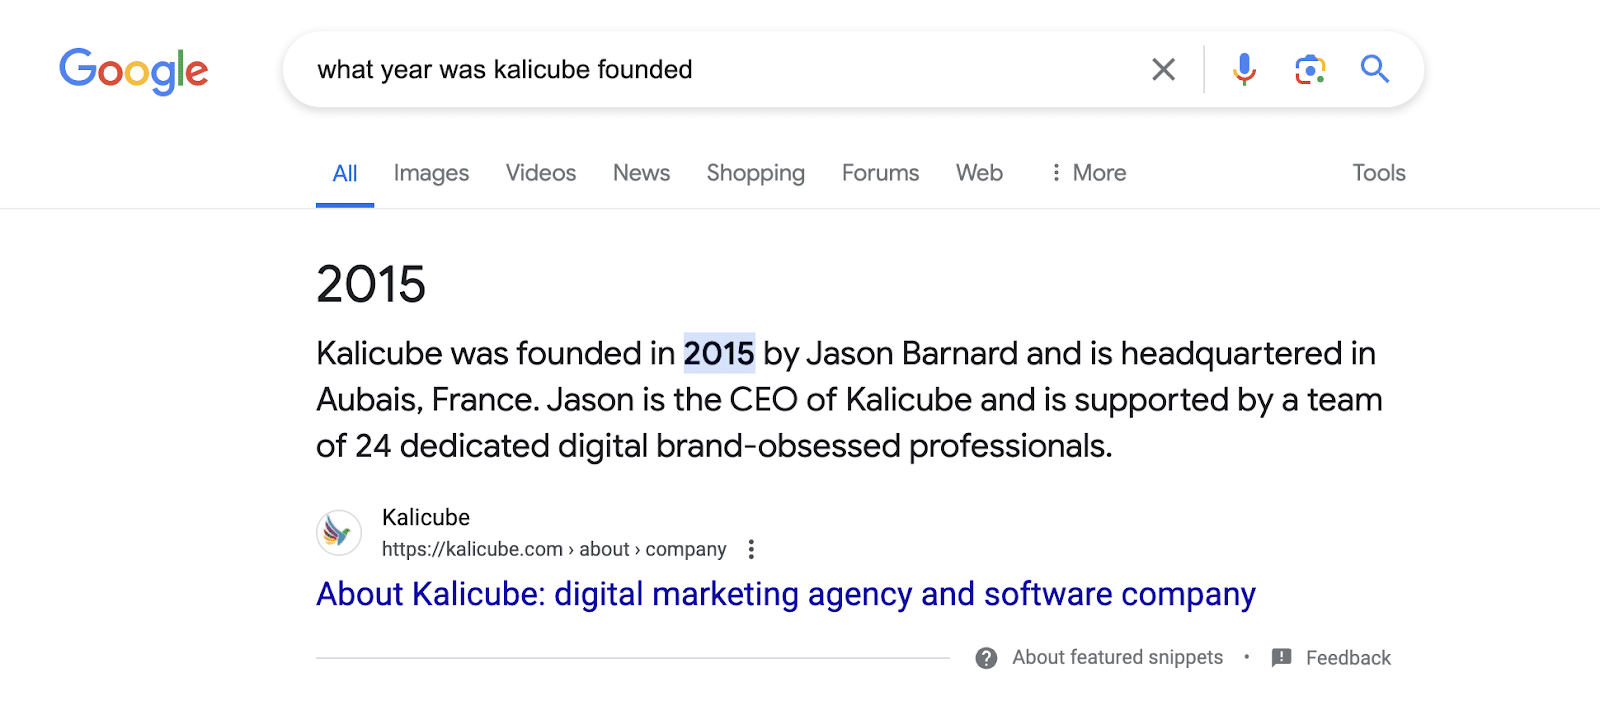 Google Search - What year was Kalicube founded